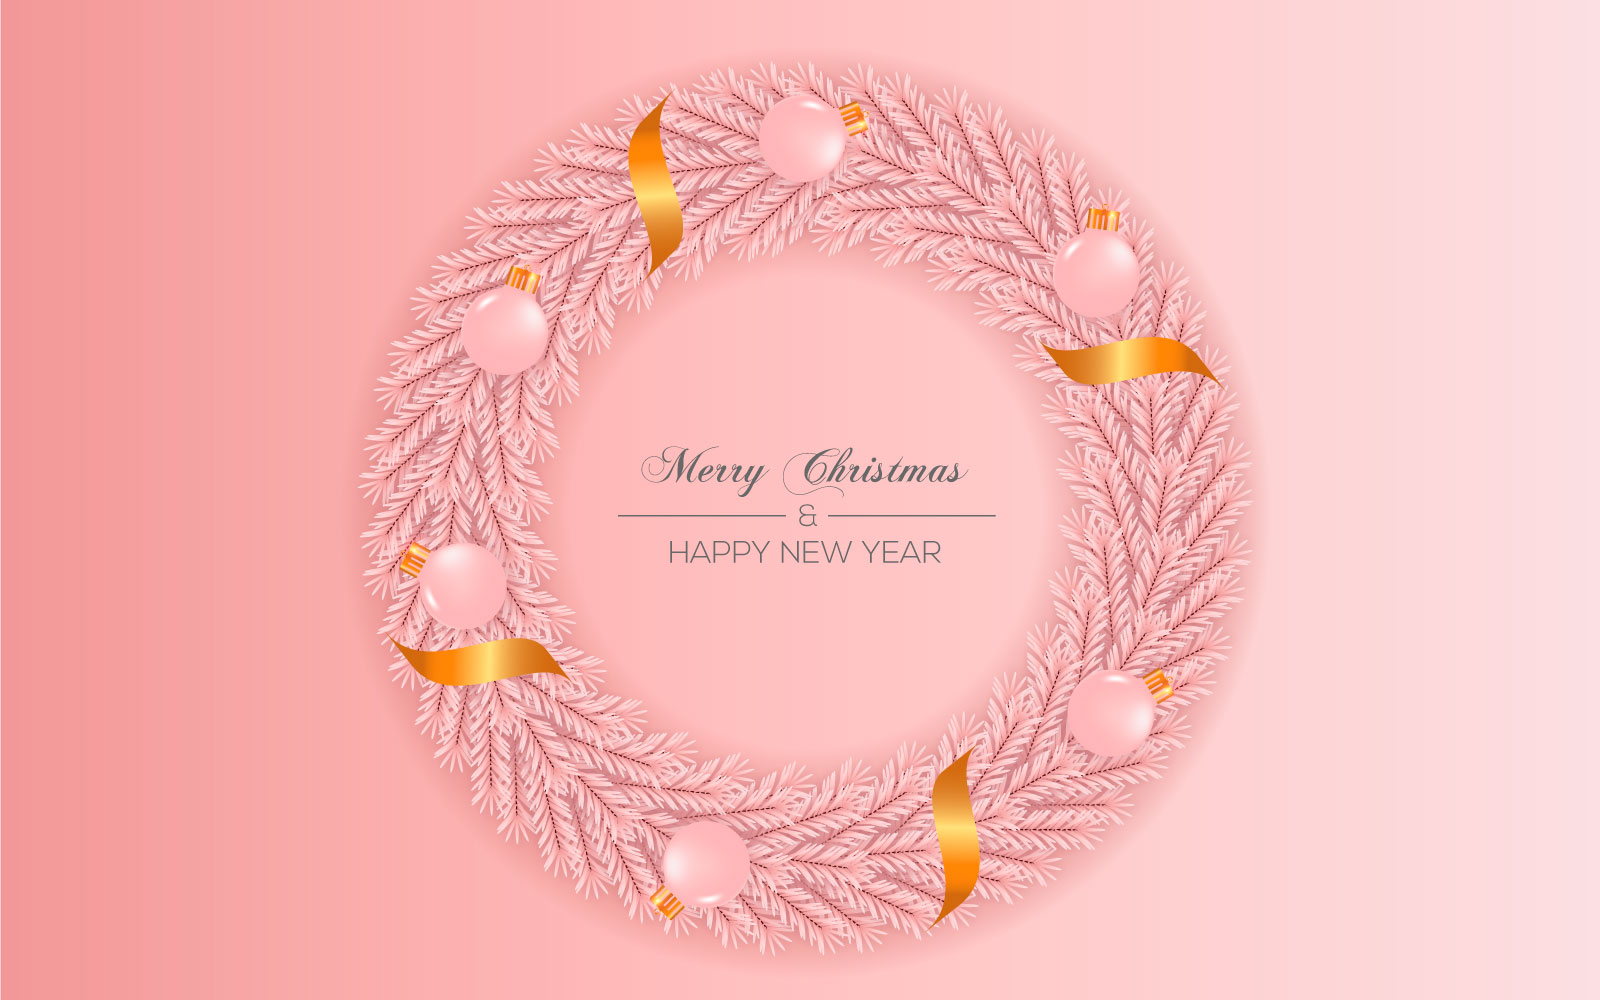 Christmas wreath vector concept design. merry christmas text in  wreath element with leaves